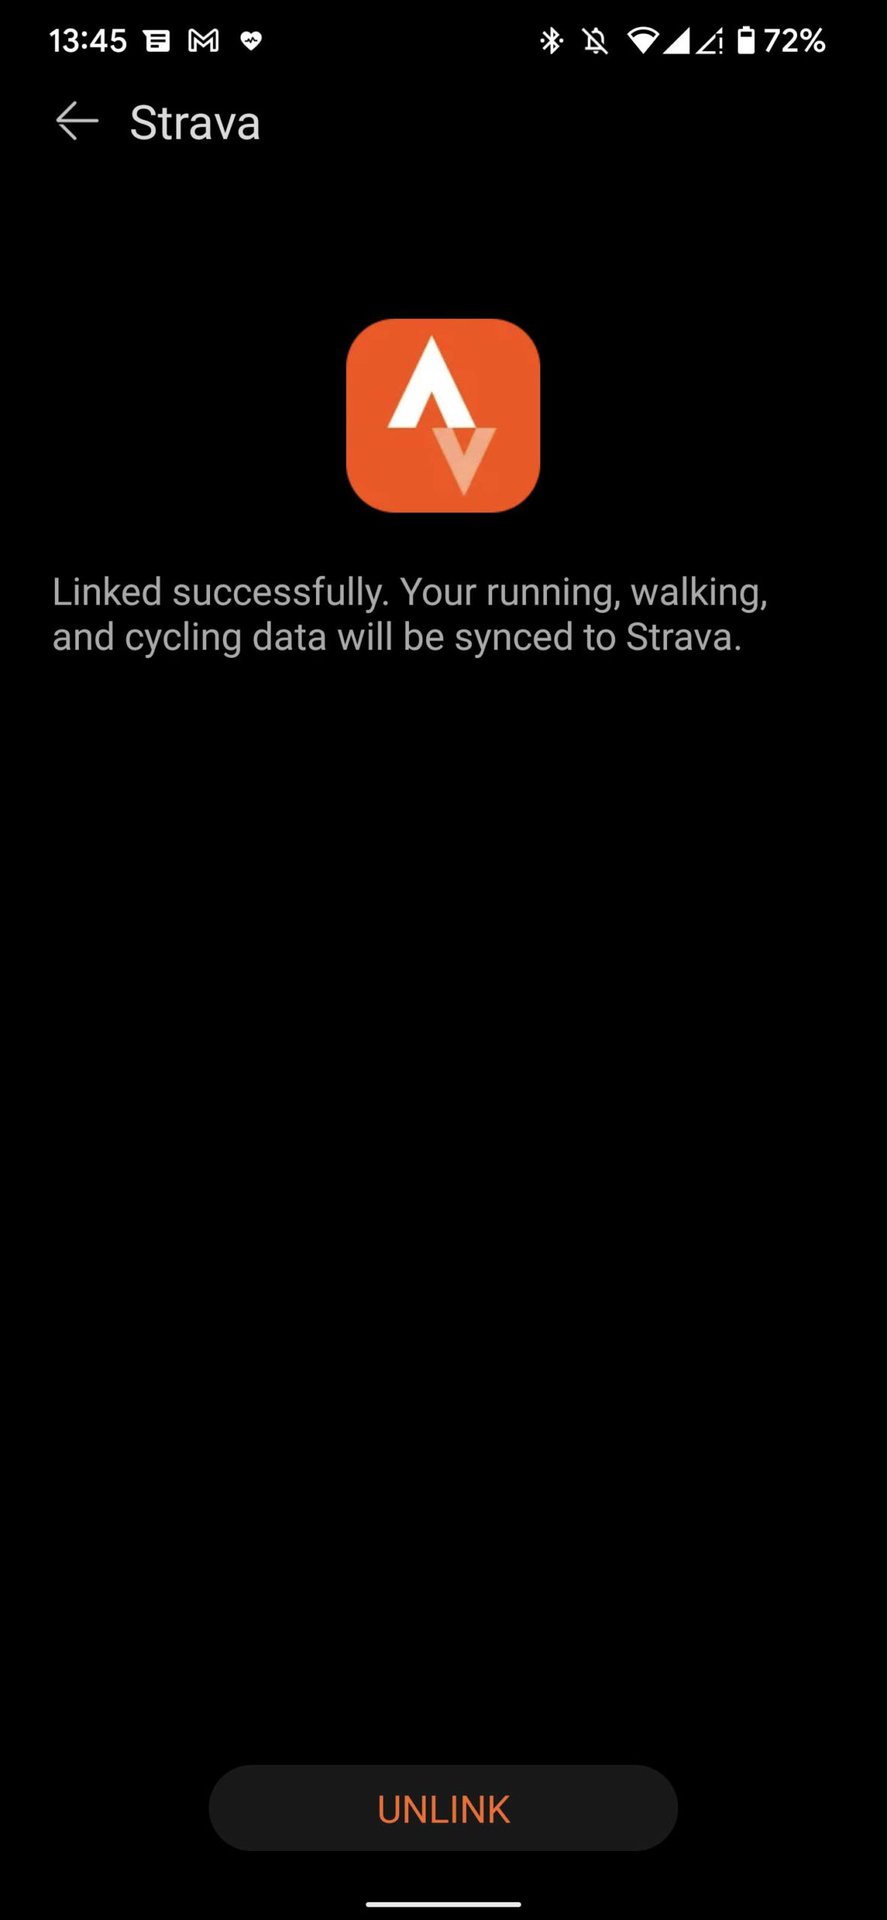 How HUAWEI Health with Strava - Android Authority